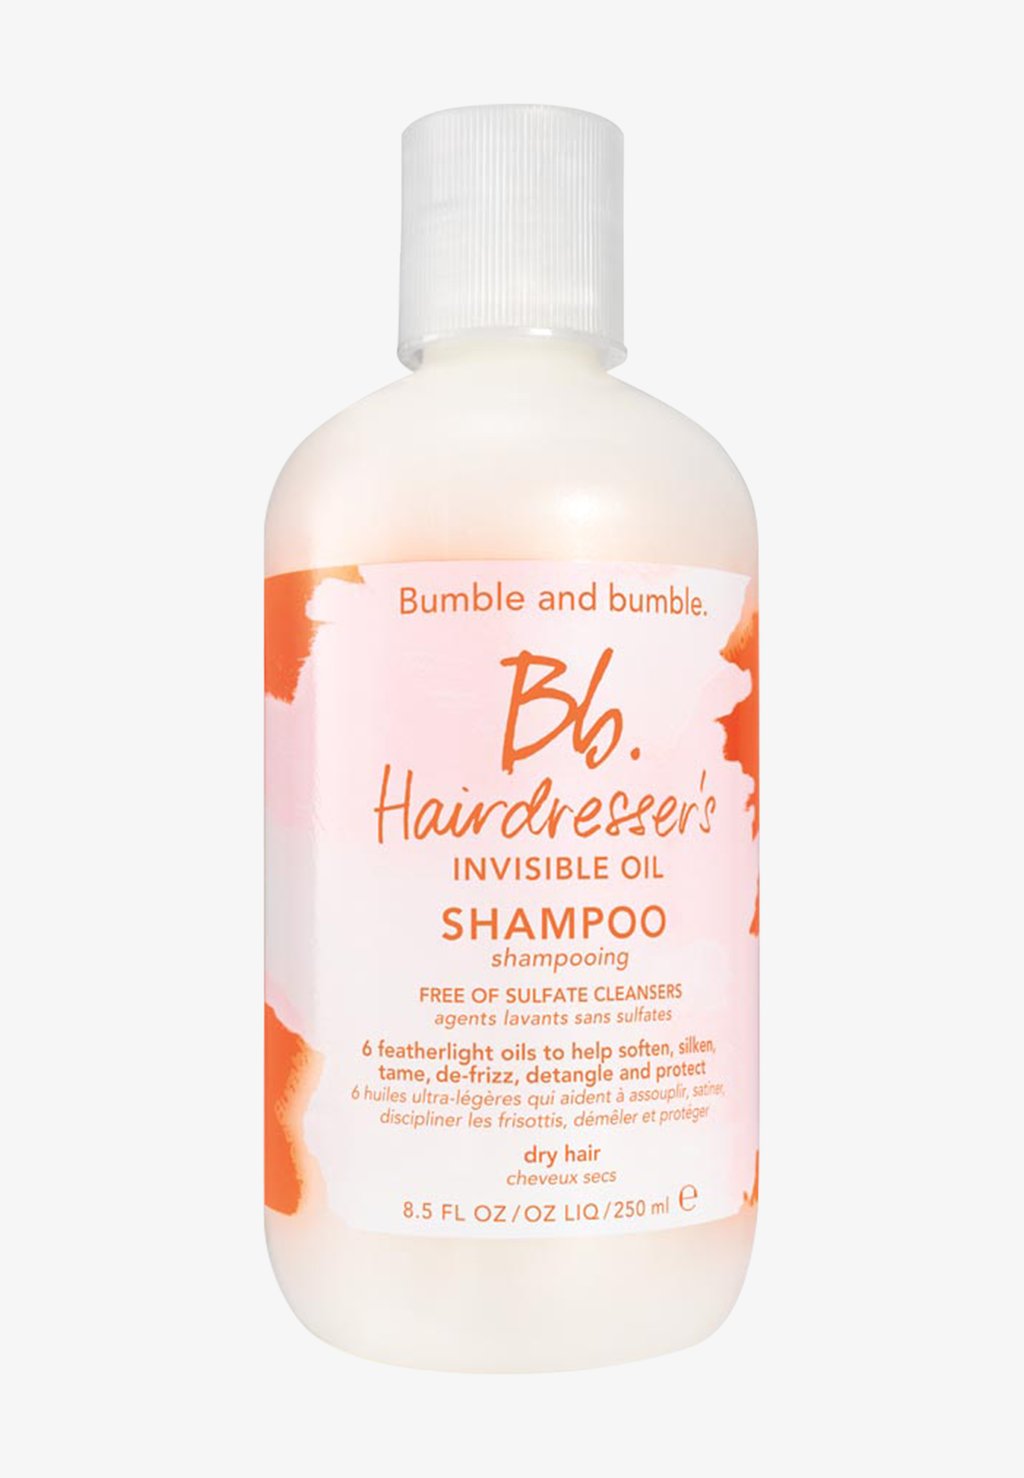 Шампунь Hairdresser´S Invisible Oil Shampoo Bumble and bumble